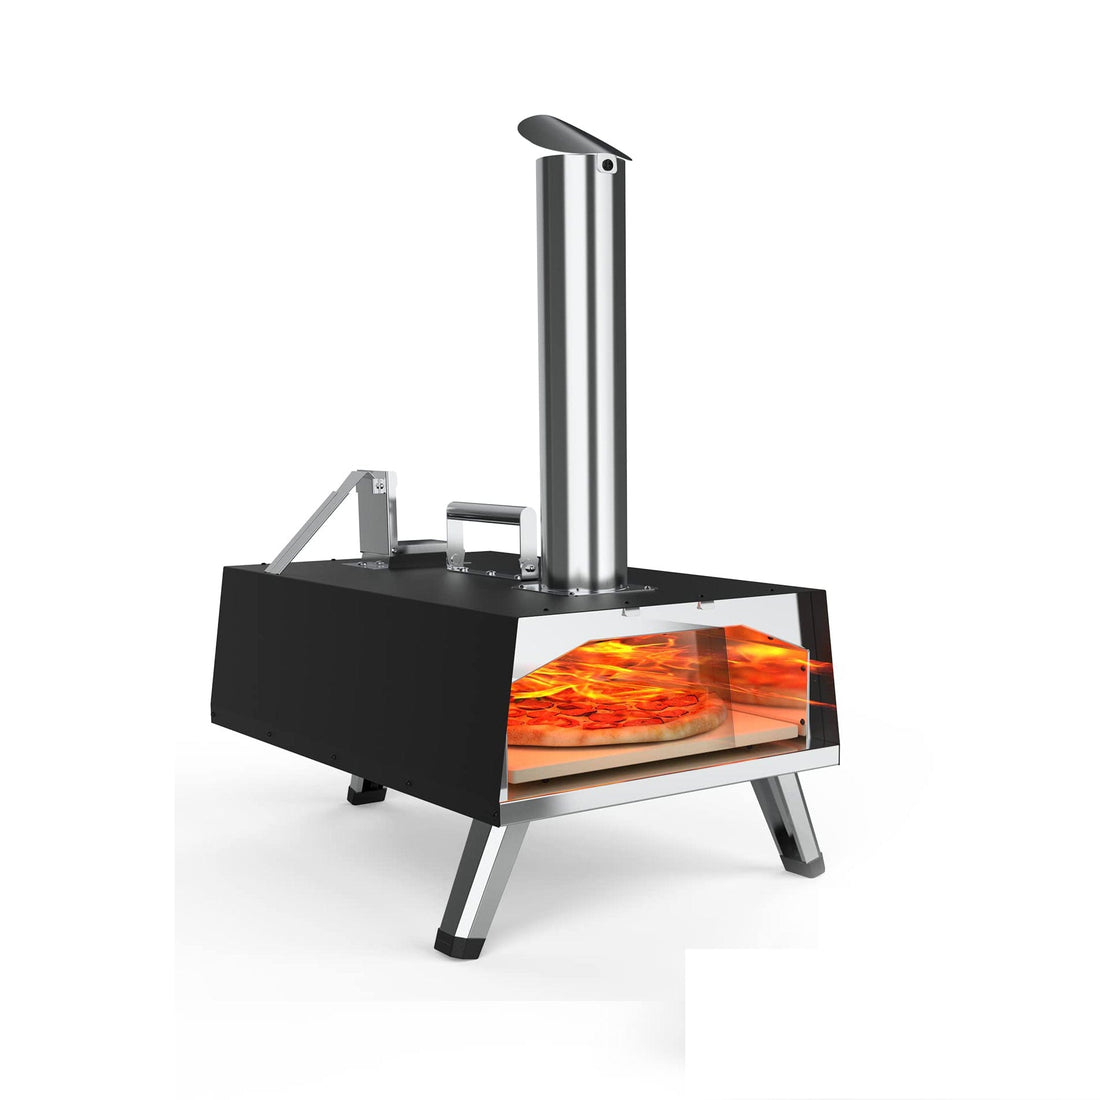 12inch Outdoor Pizza Oven Stainless Steel with Foldable Legs